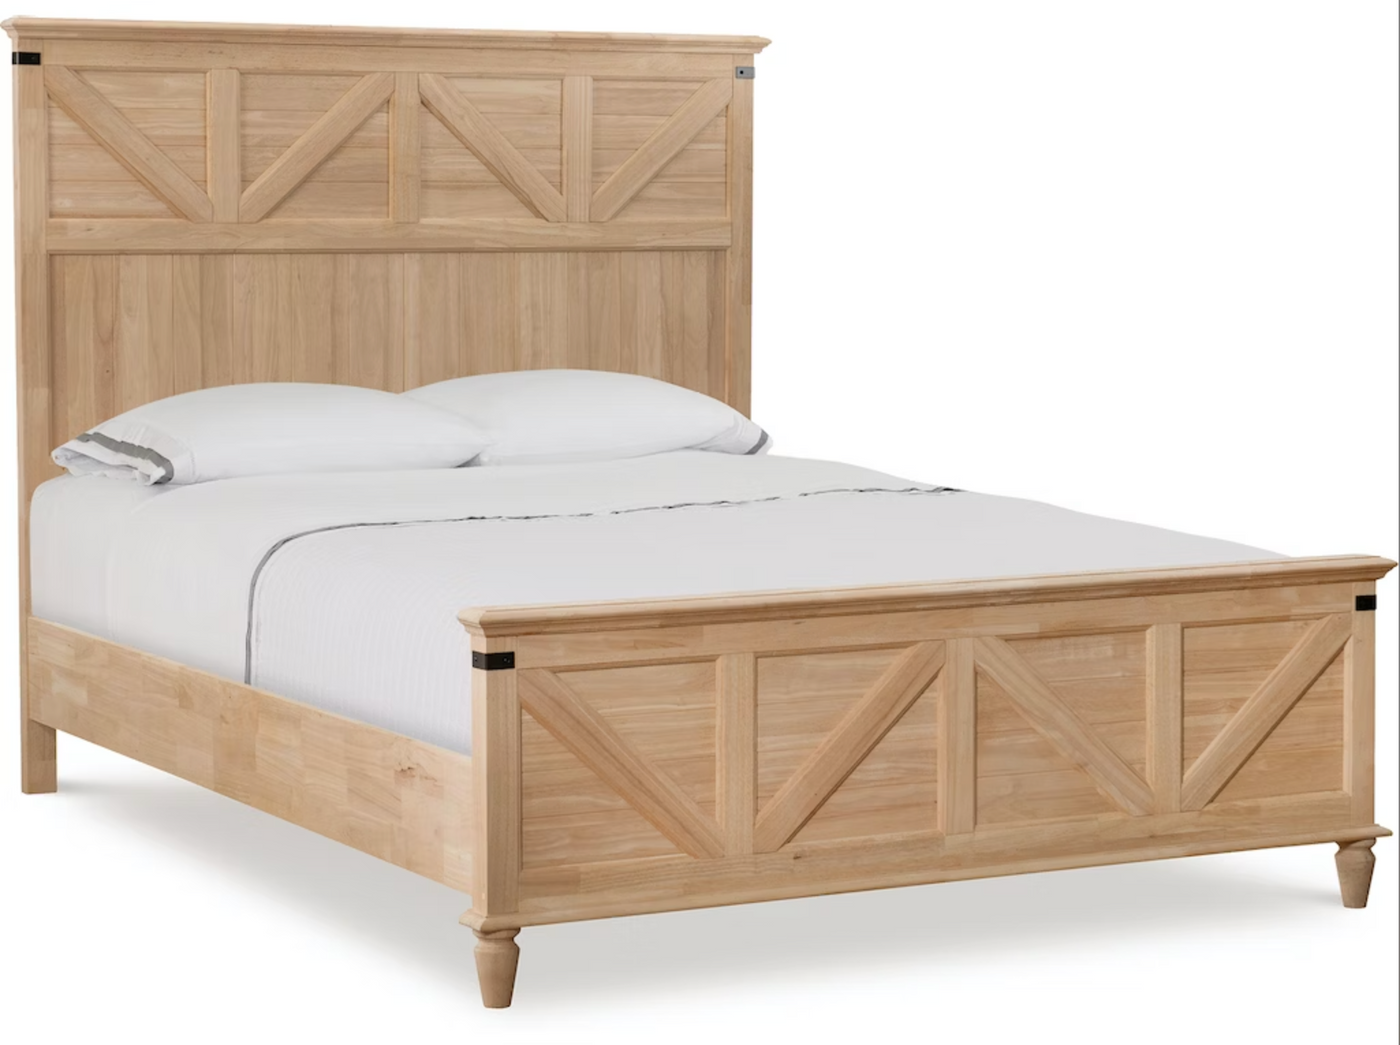 The Pierce Bed: King